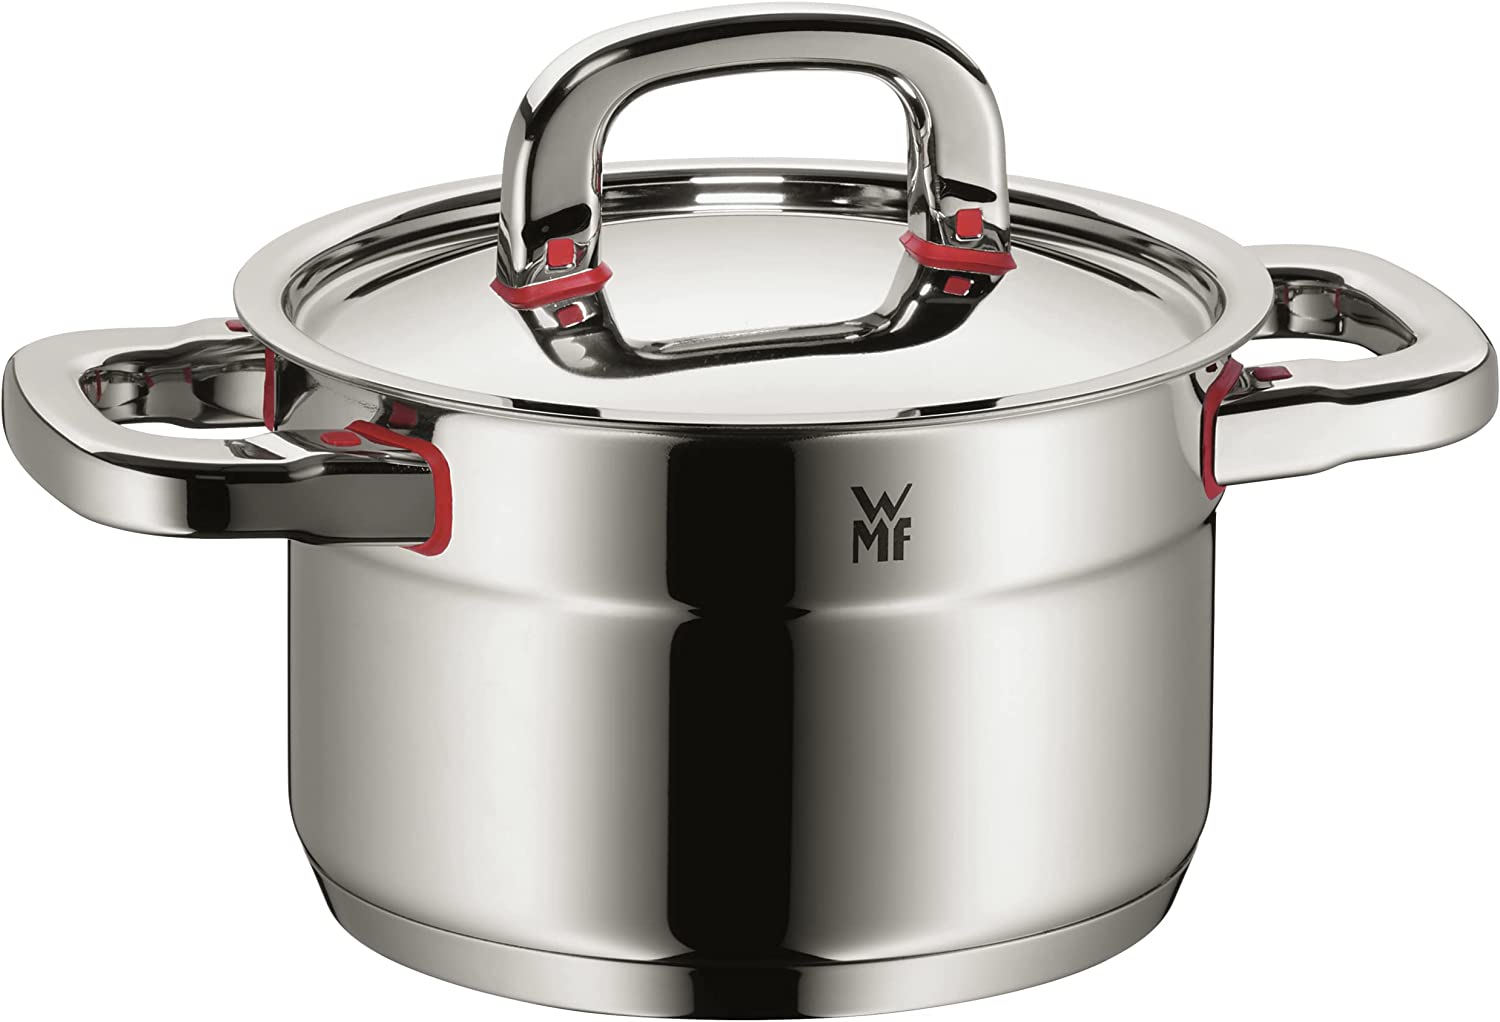 WMF cookware Ø 16 cm approx. 2l Premium One Inside scaling vapor hole Cool+ Technology metal lid Cromargan stainless steel brushed suitable for all stove tops including induction dishwasher-safe